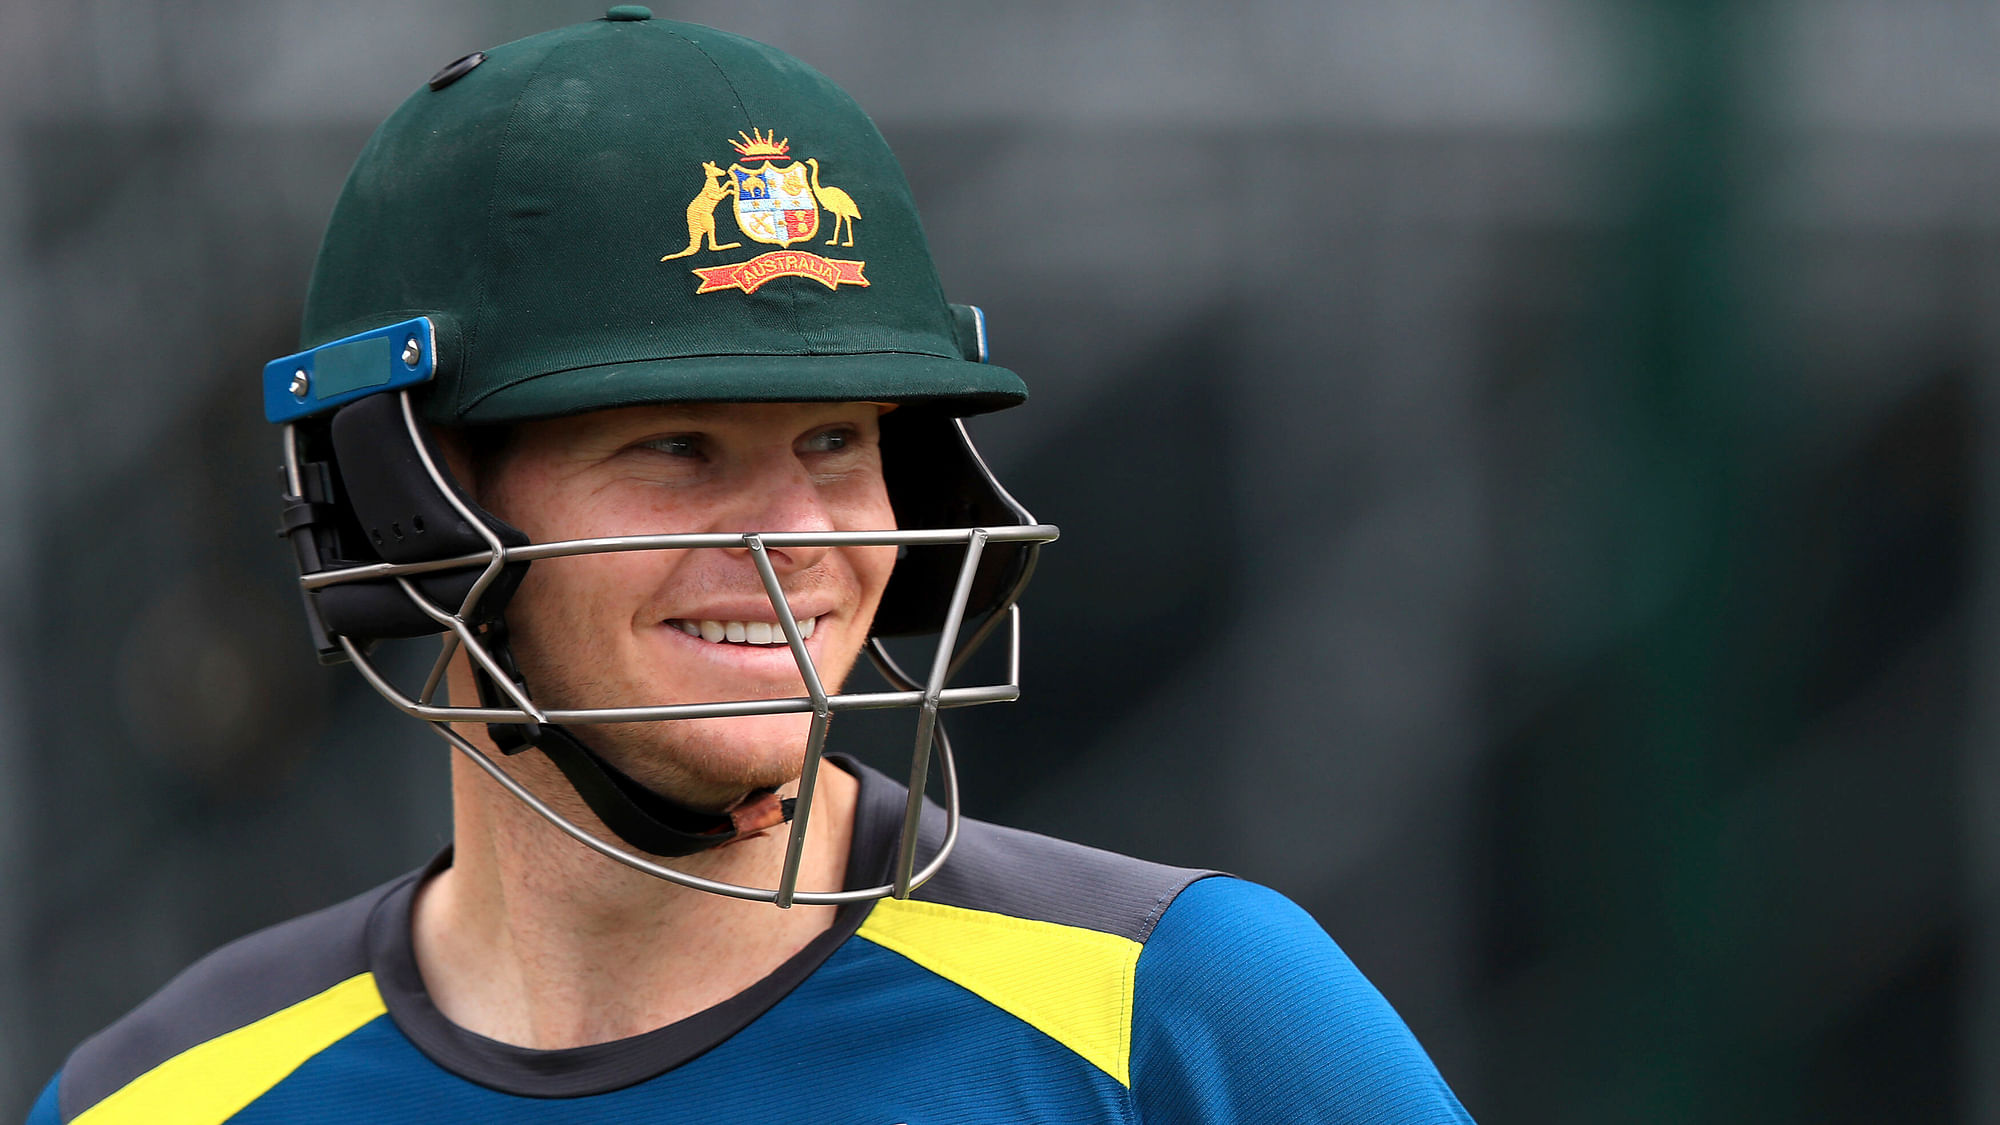 Steve Smith has a chance to extend his lead in the fourth Ashes Test, starting Wednesday at the Old Trafford in Manchester.